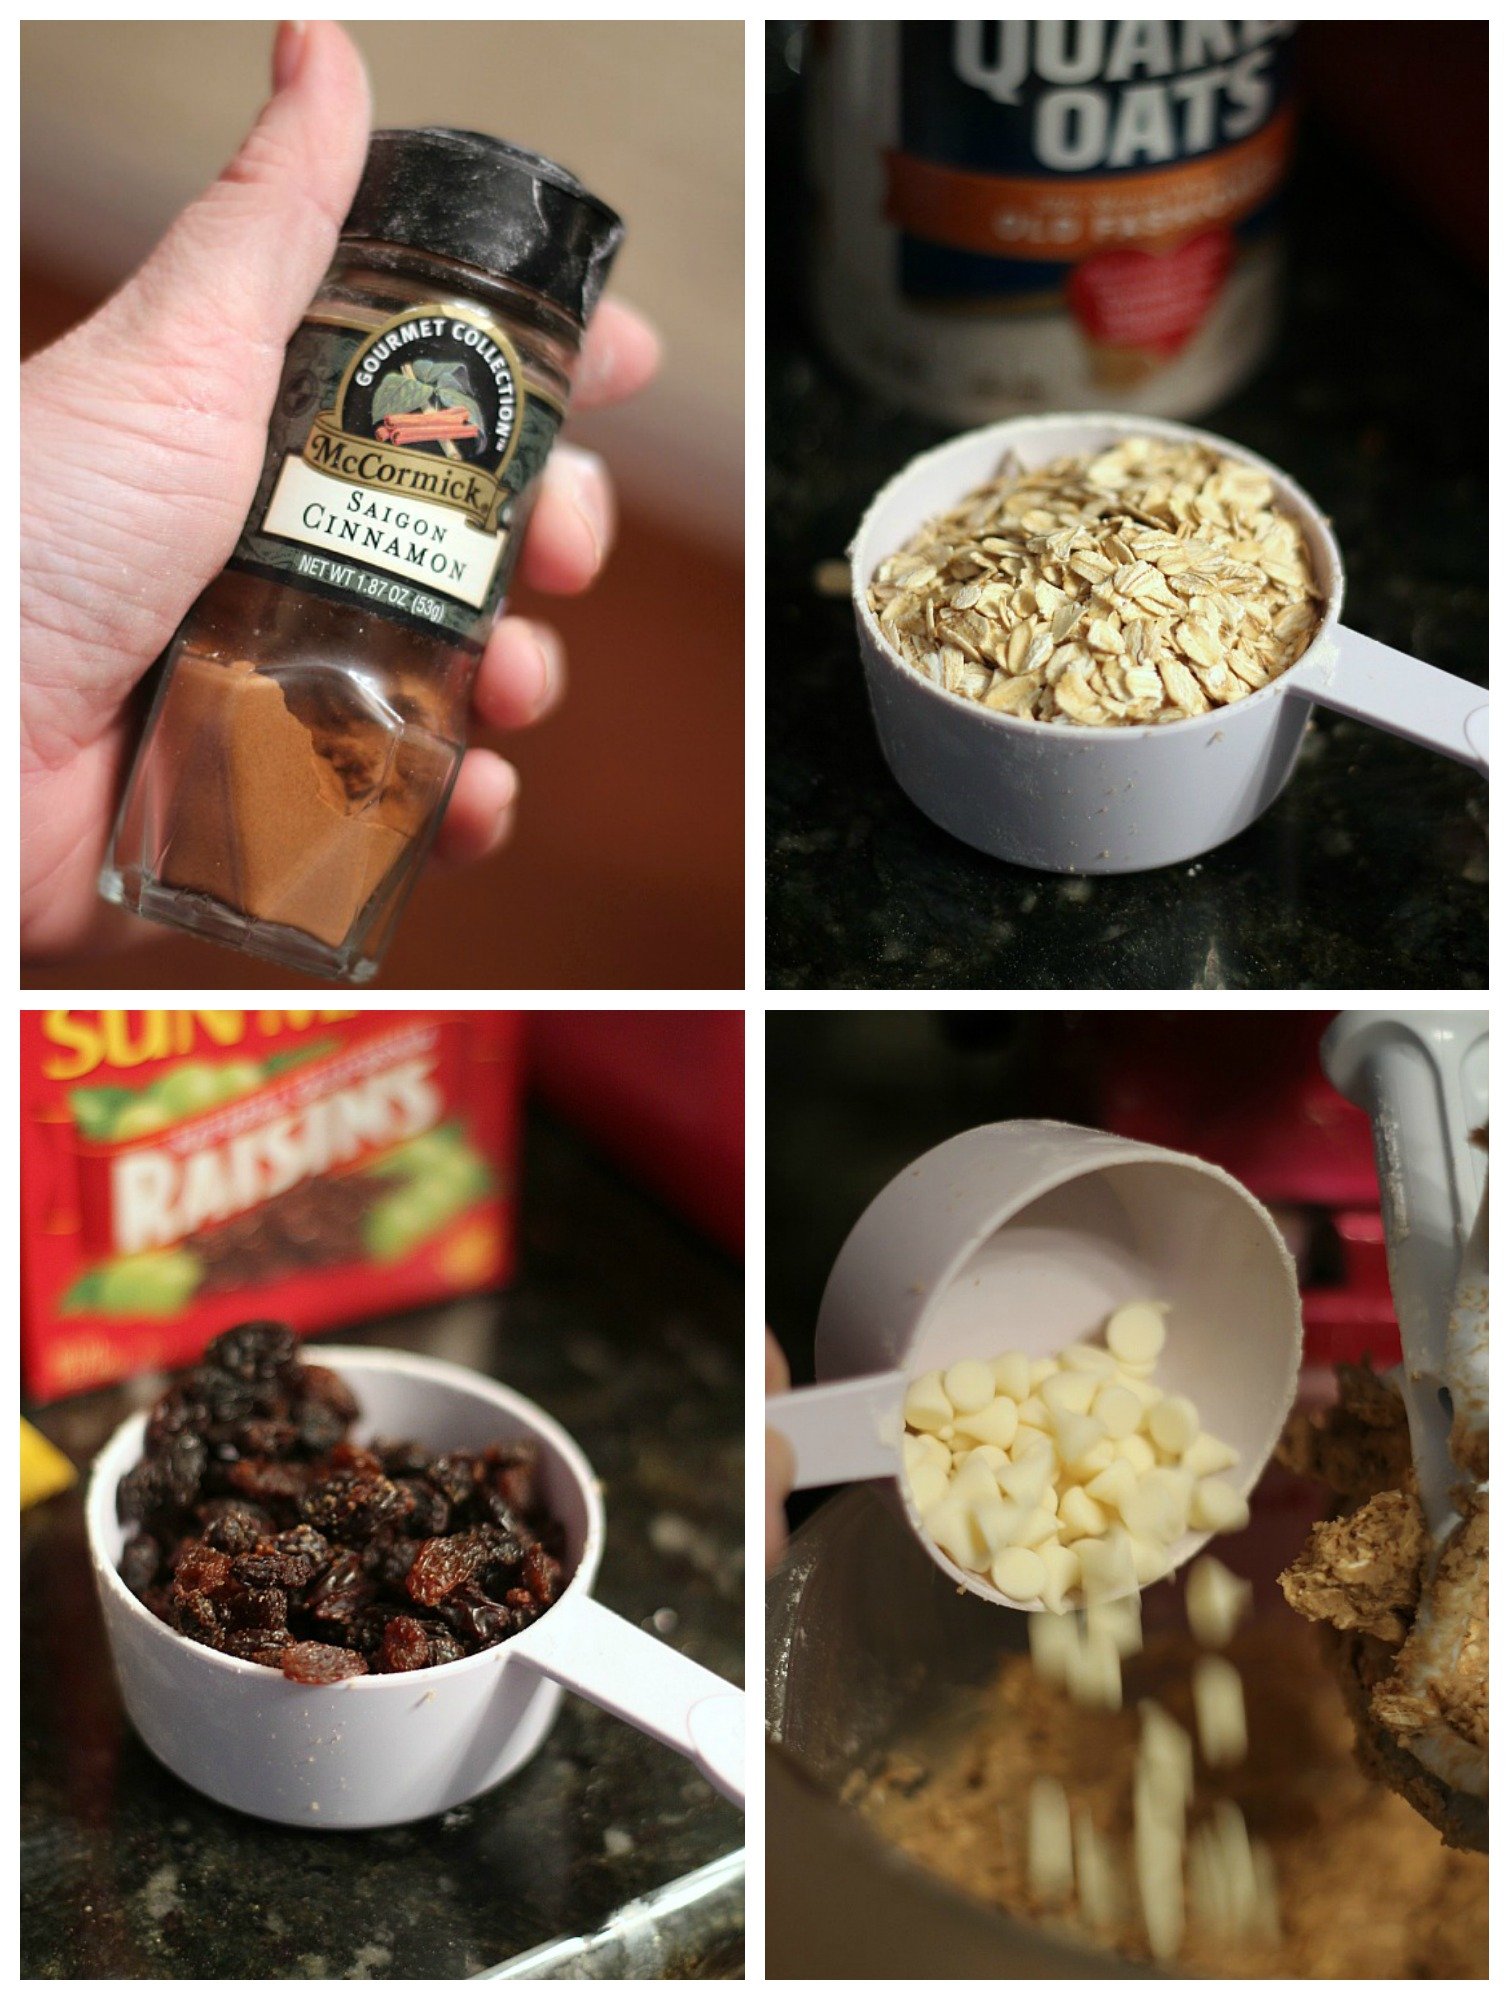 Photo collage of the various oatmeal raisin cookie add-ins: Saigon cinnamon, oats, raisins, and white chocolate chips.